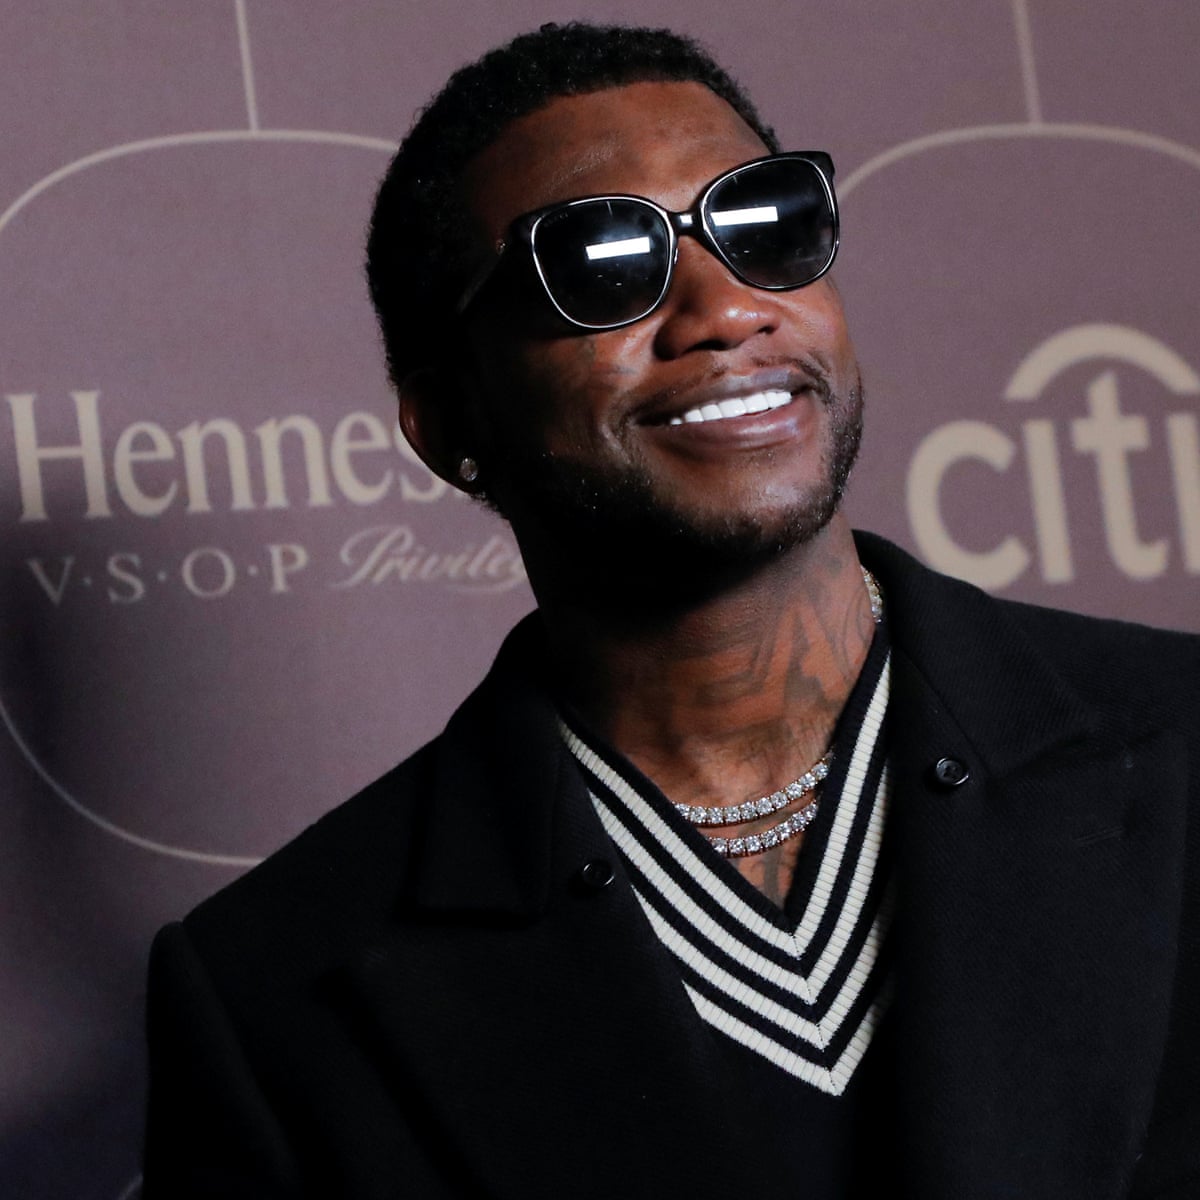 Gucci Mane biopic in the works based on rapper's book | Gucci Mane | The  Guardian